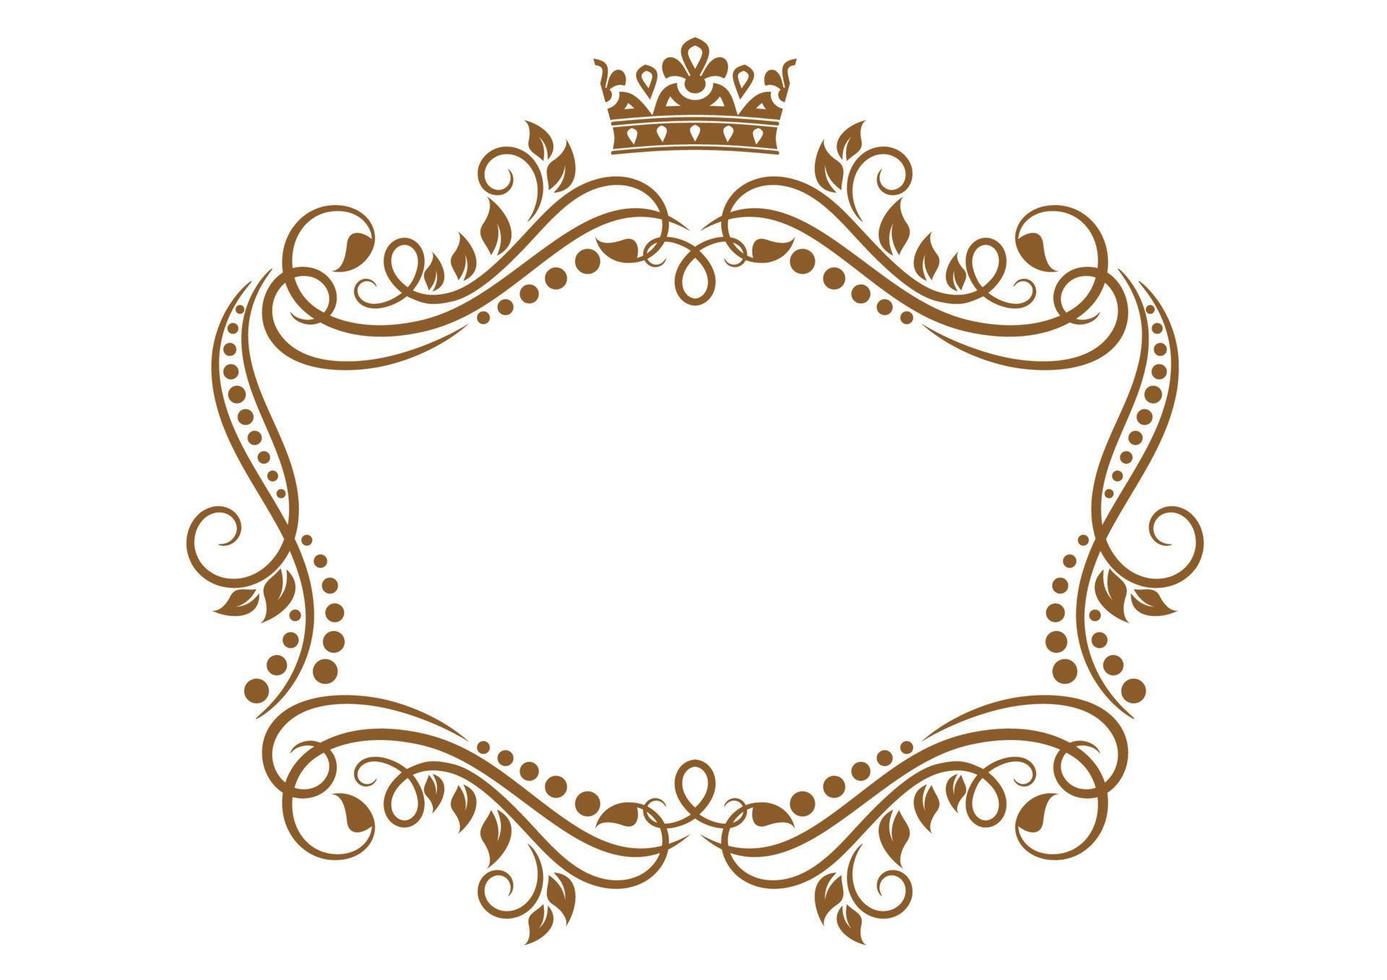 Retro frame with royal crown and flowers vector